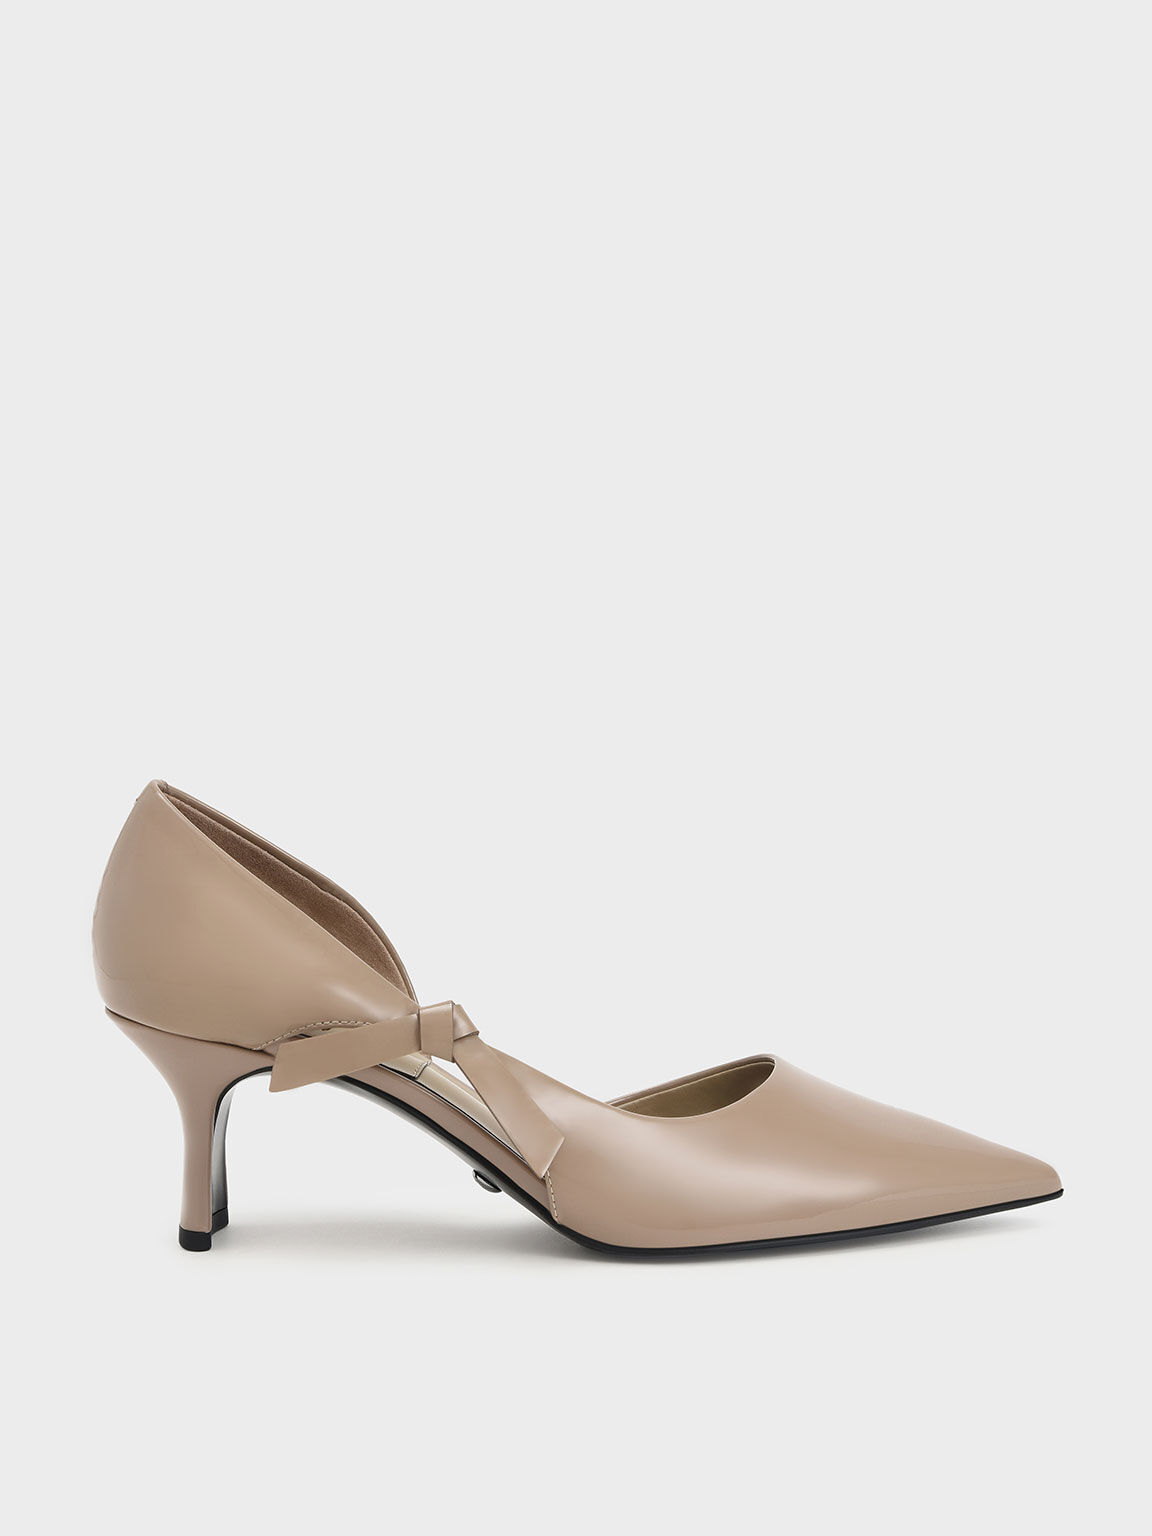 Patent Leather Bow-Tie Half D'Orsay Pumps, Taupe, hi-res